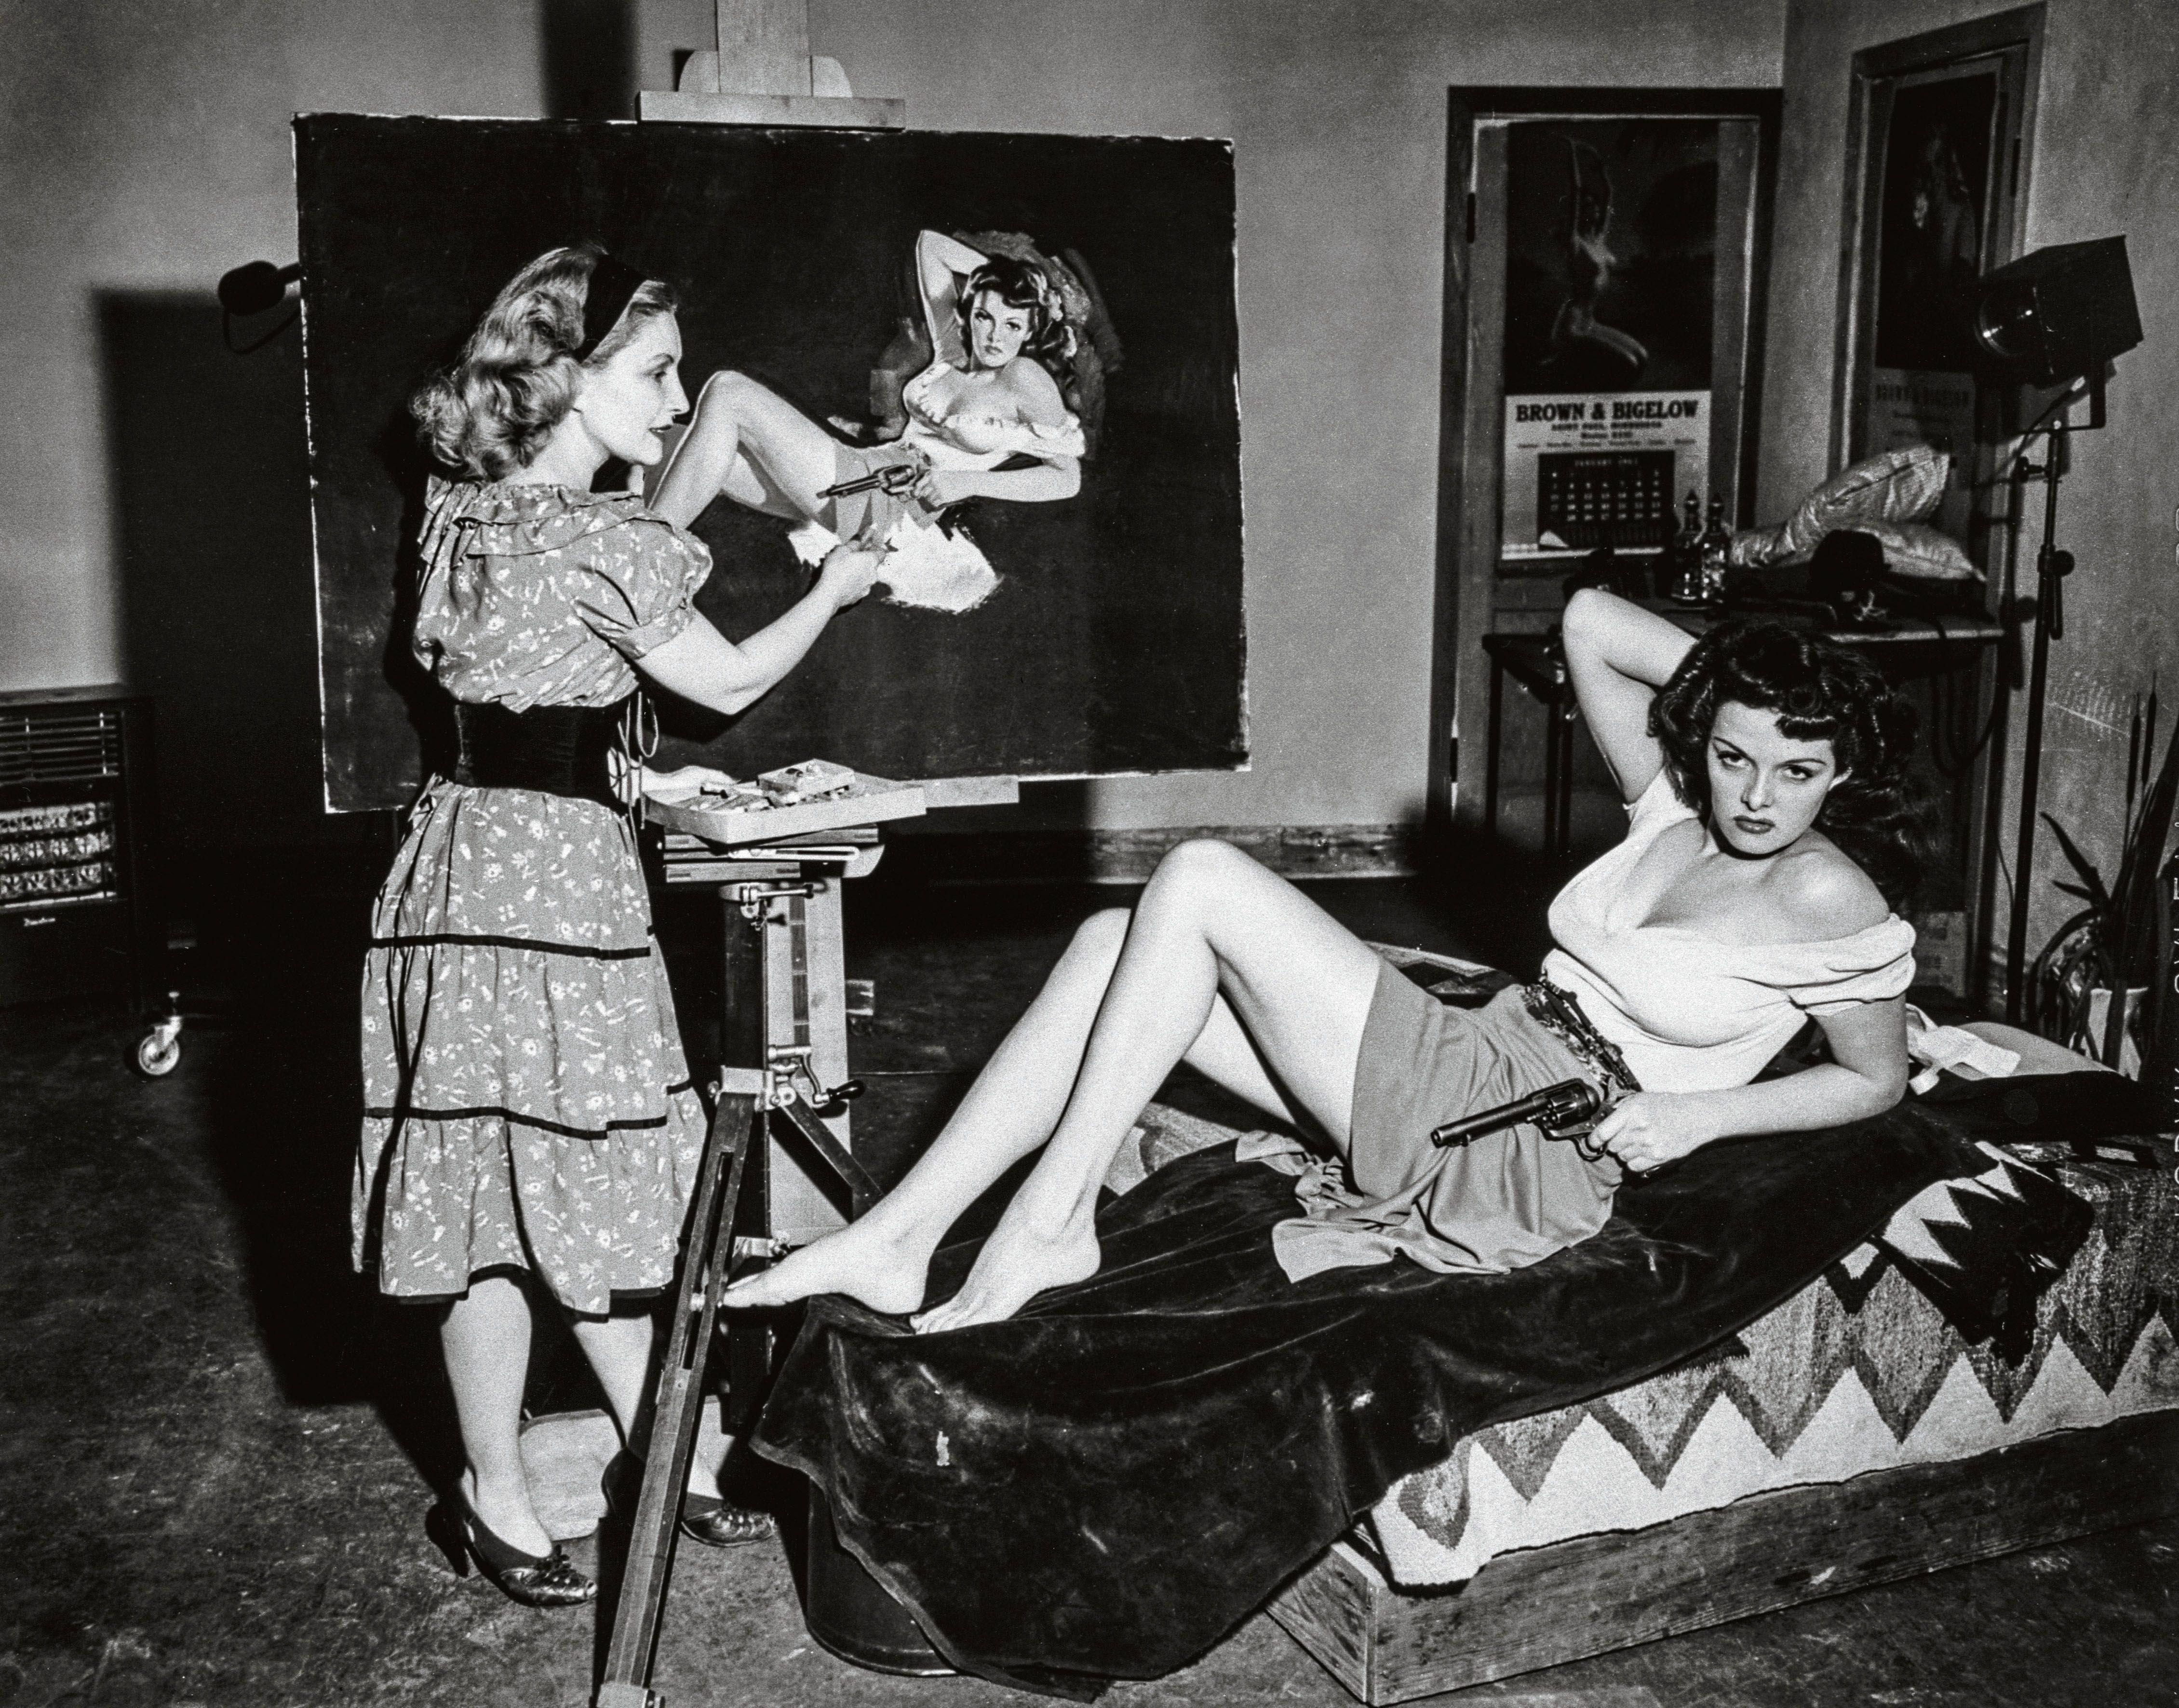 Seaxy Video Boys And Girls - The lost art of the American pin-up | CNN